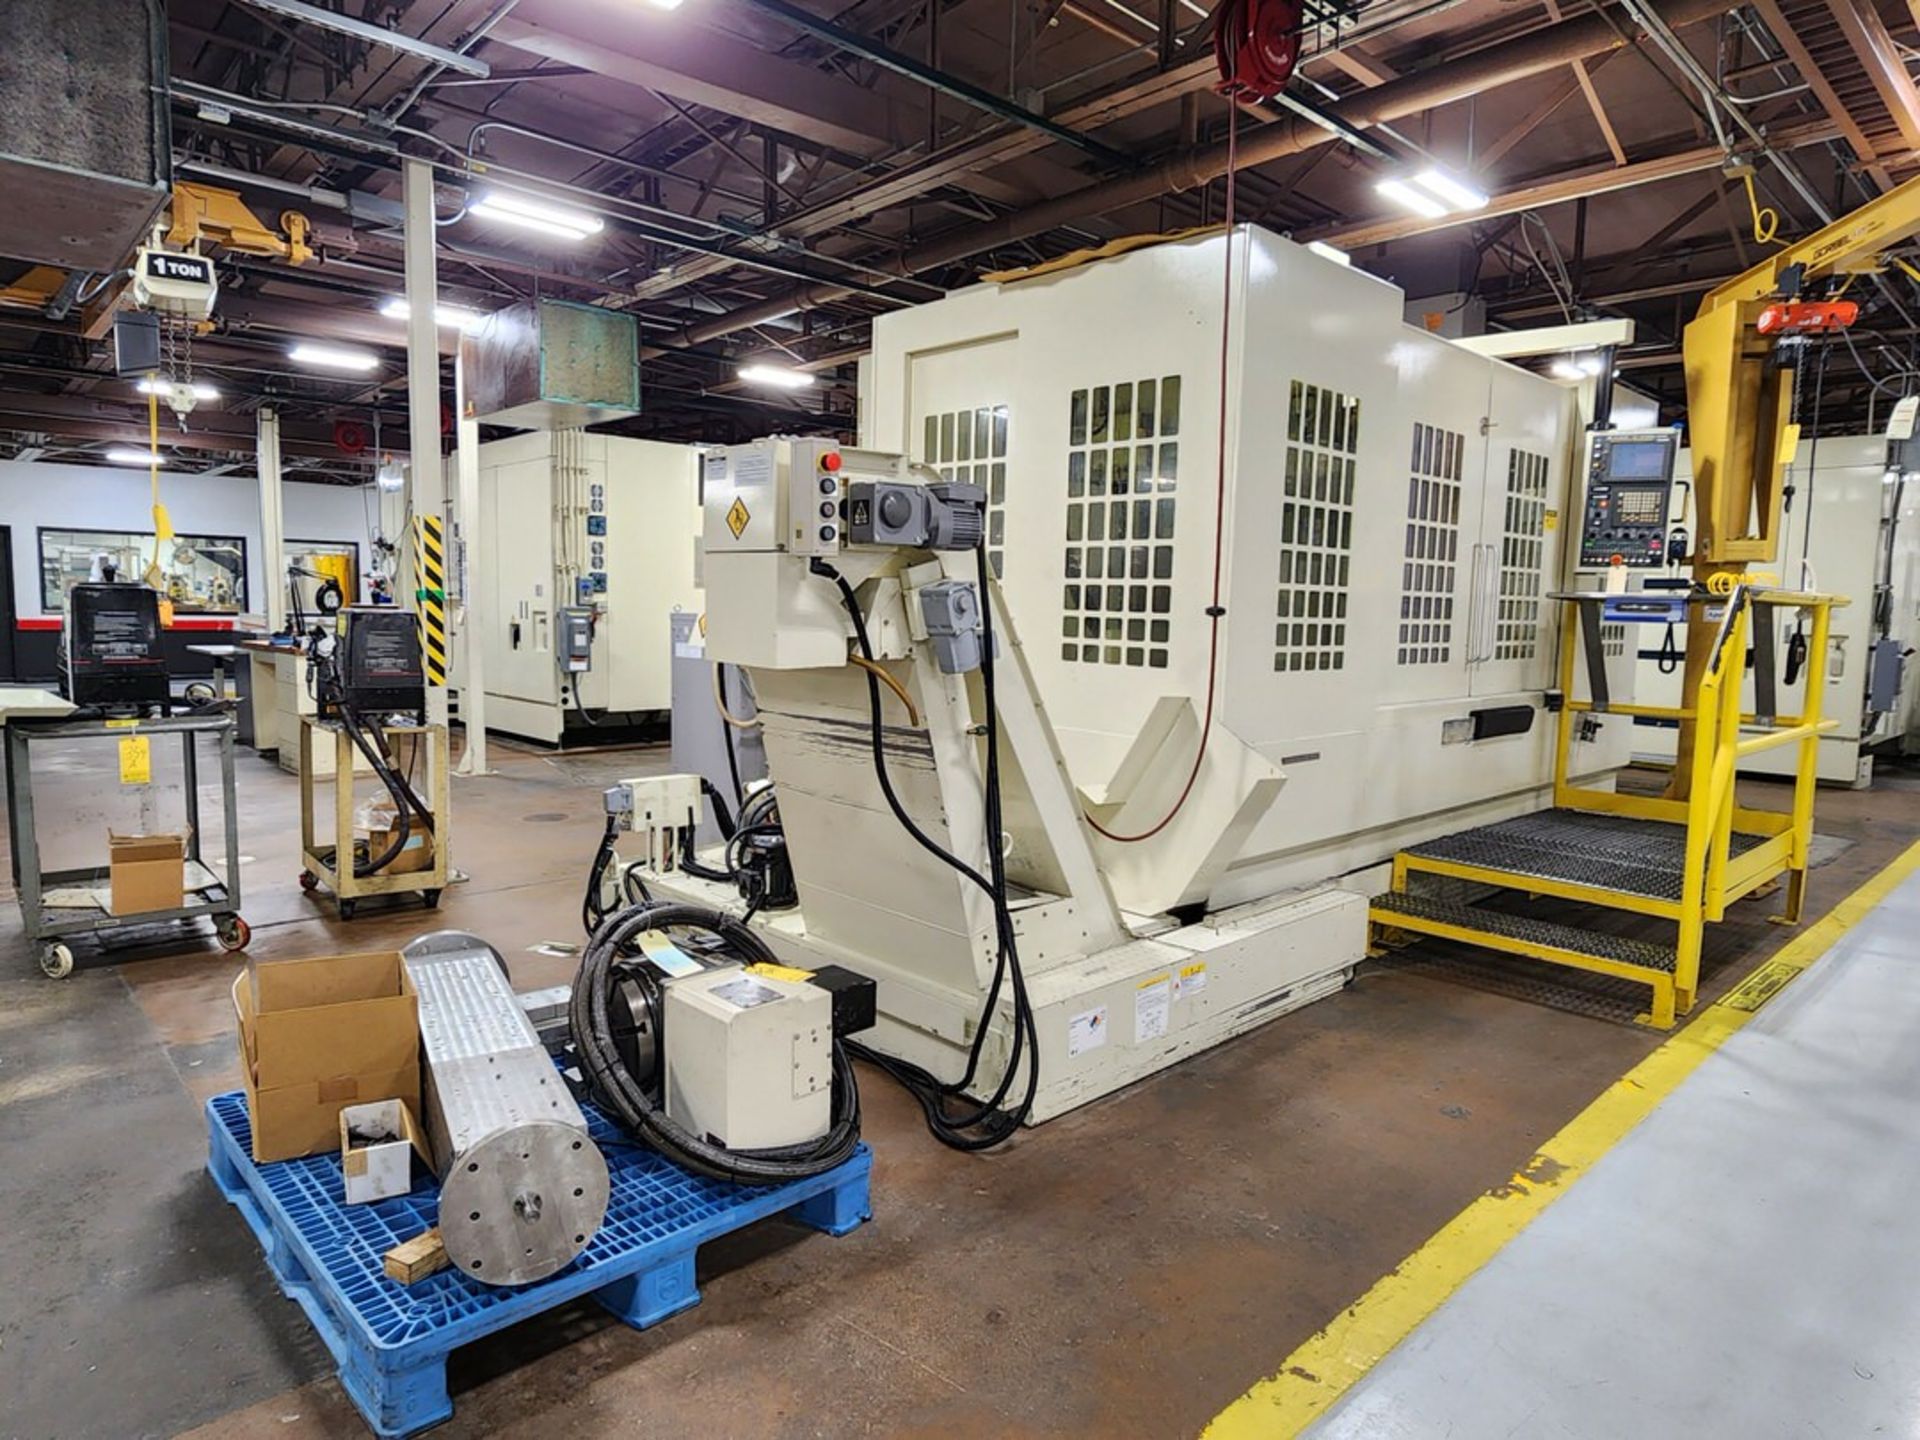 2008 Kitamura 7HiF Vertical Machining Center W/ Fanuc Series 16i-MB; 30,000 Spindle Speed; - Image 10 of 23